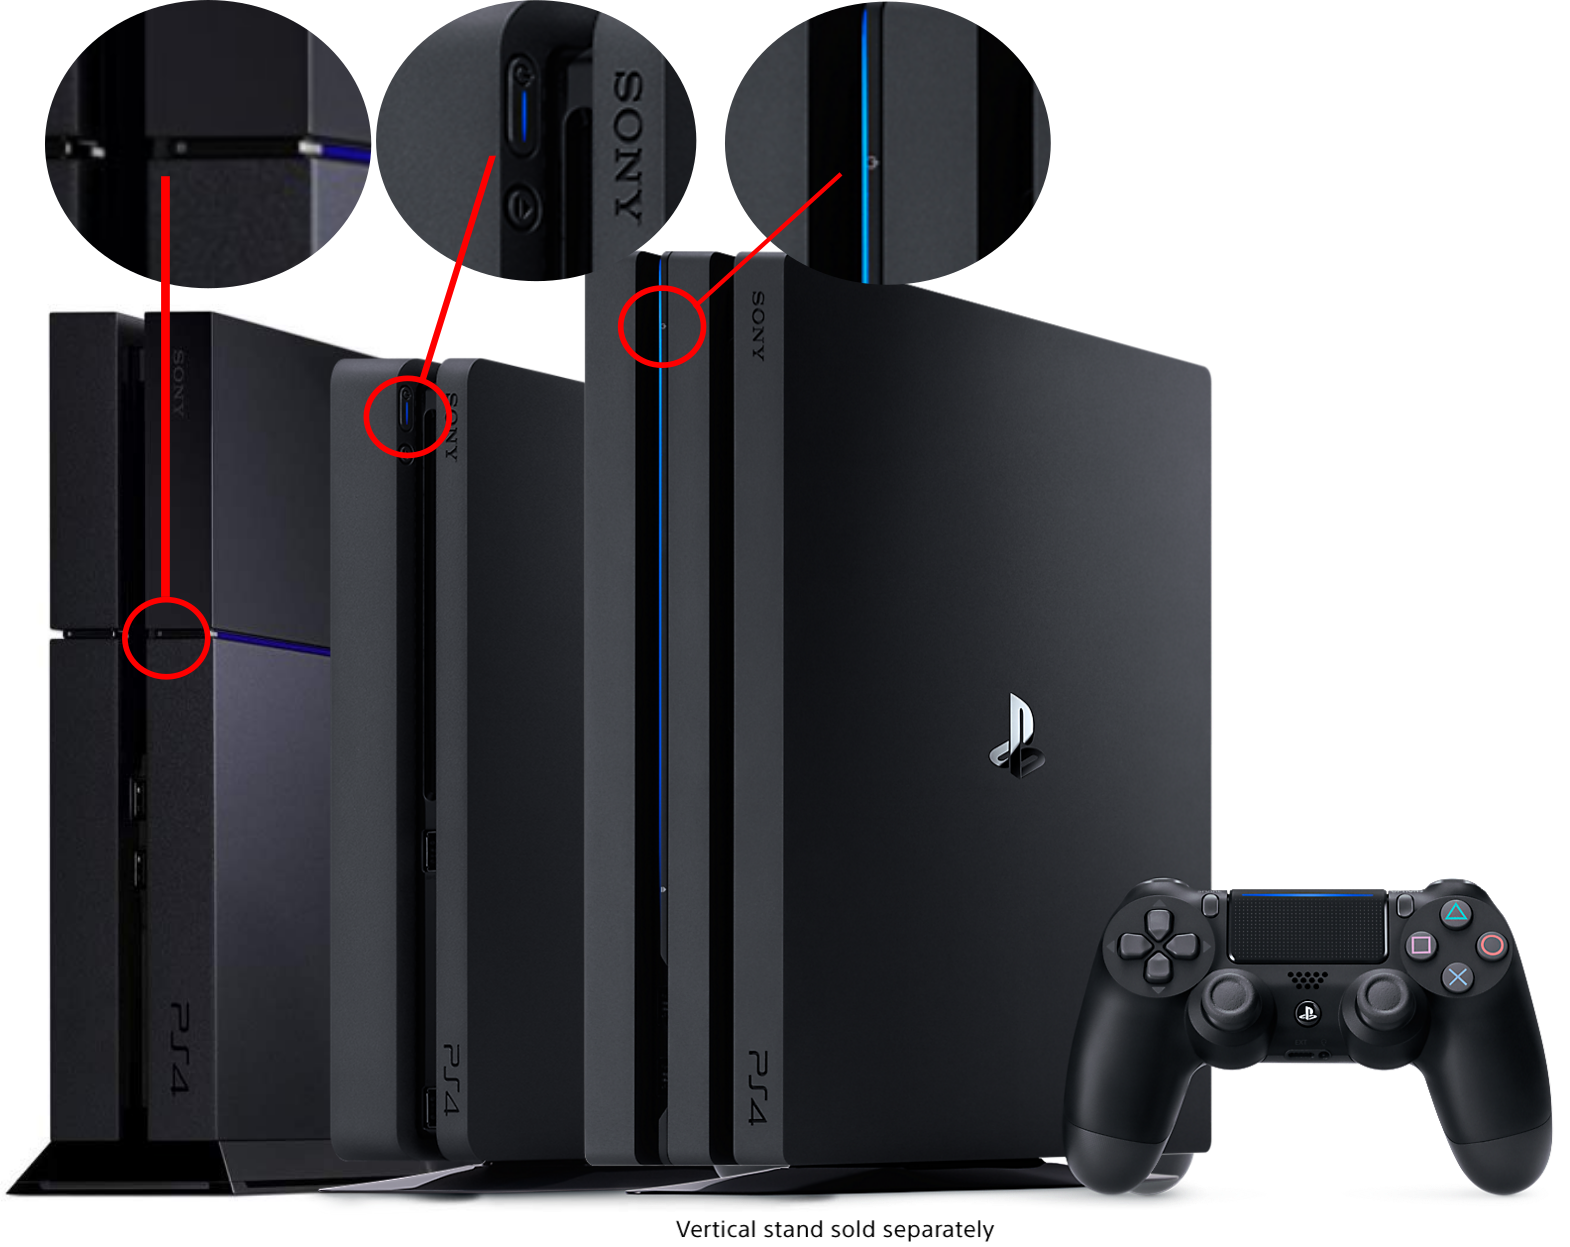 How To Boot Up A Ps4 In Safe Mode